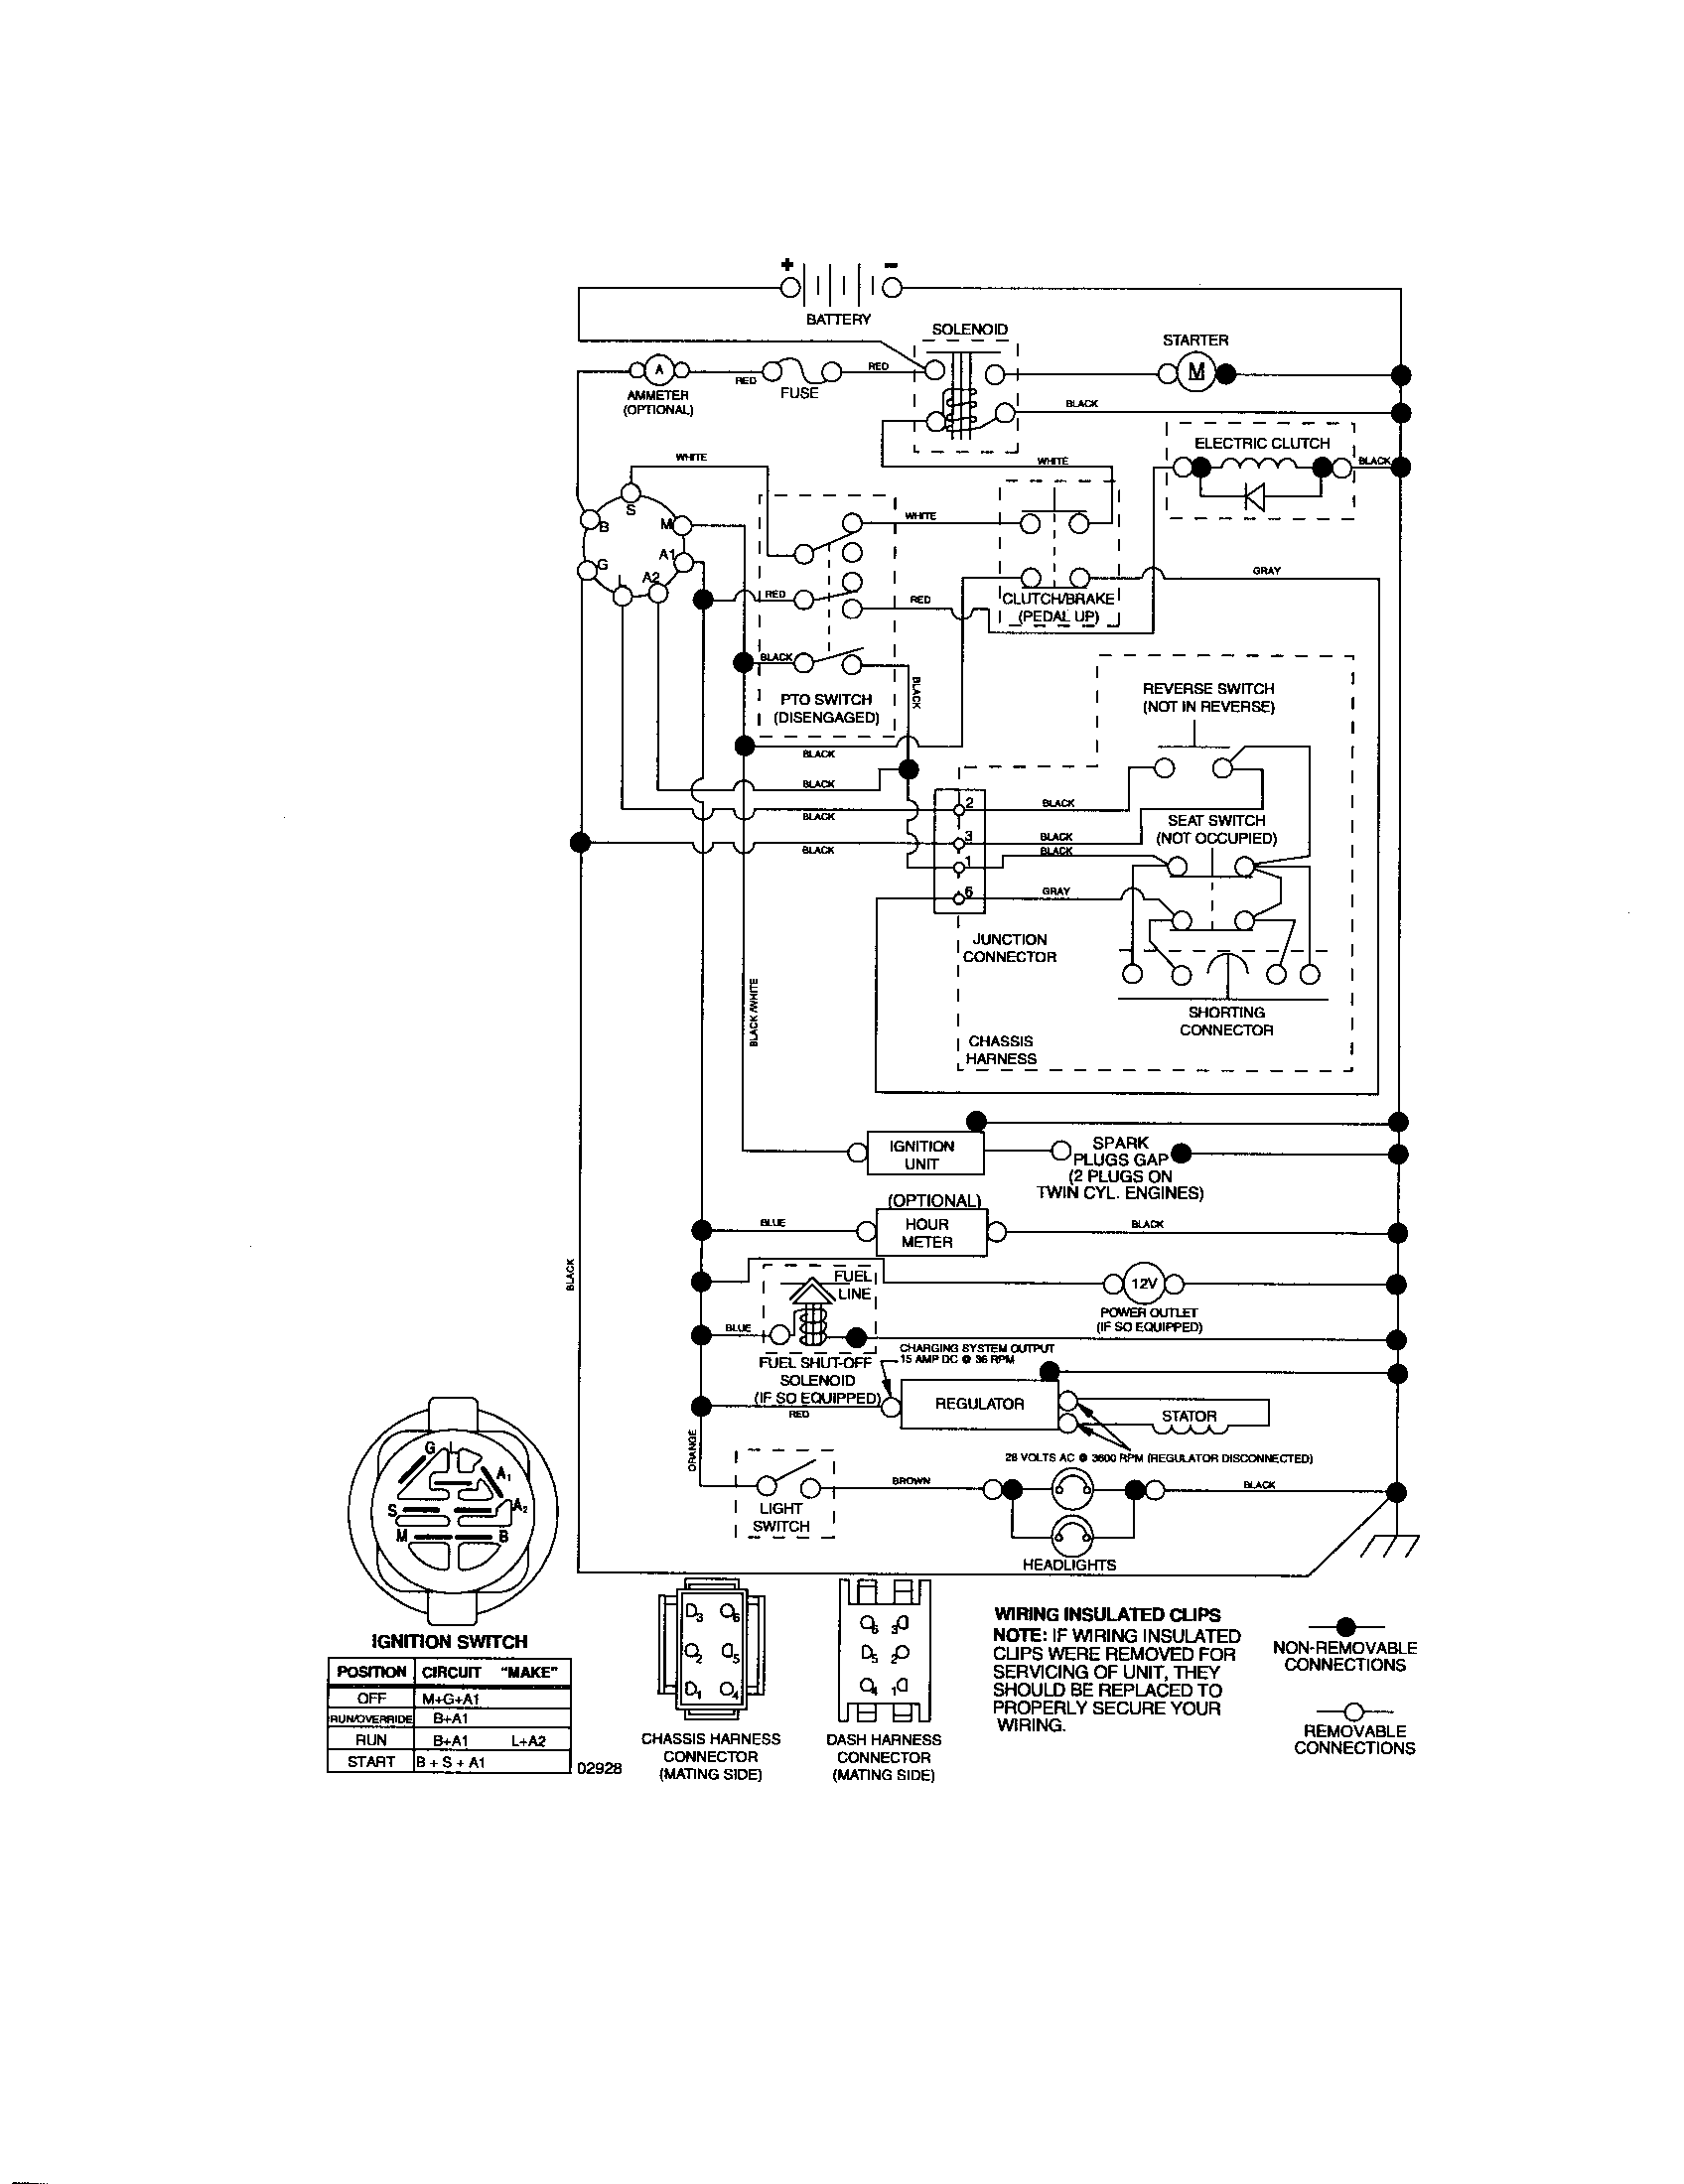 Briggs And Stratton Engine Wiring Diagram from c.searspartsdirect.com